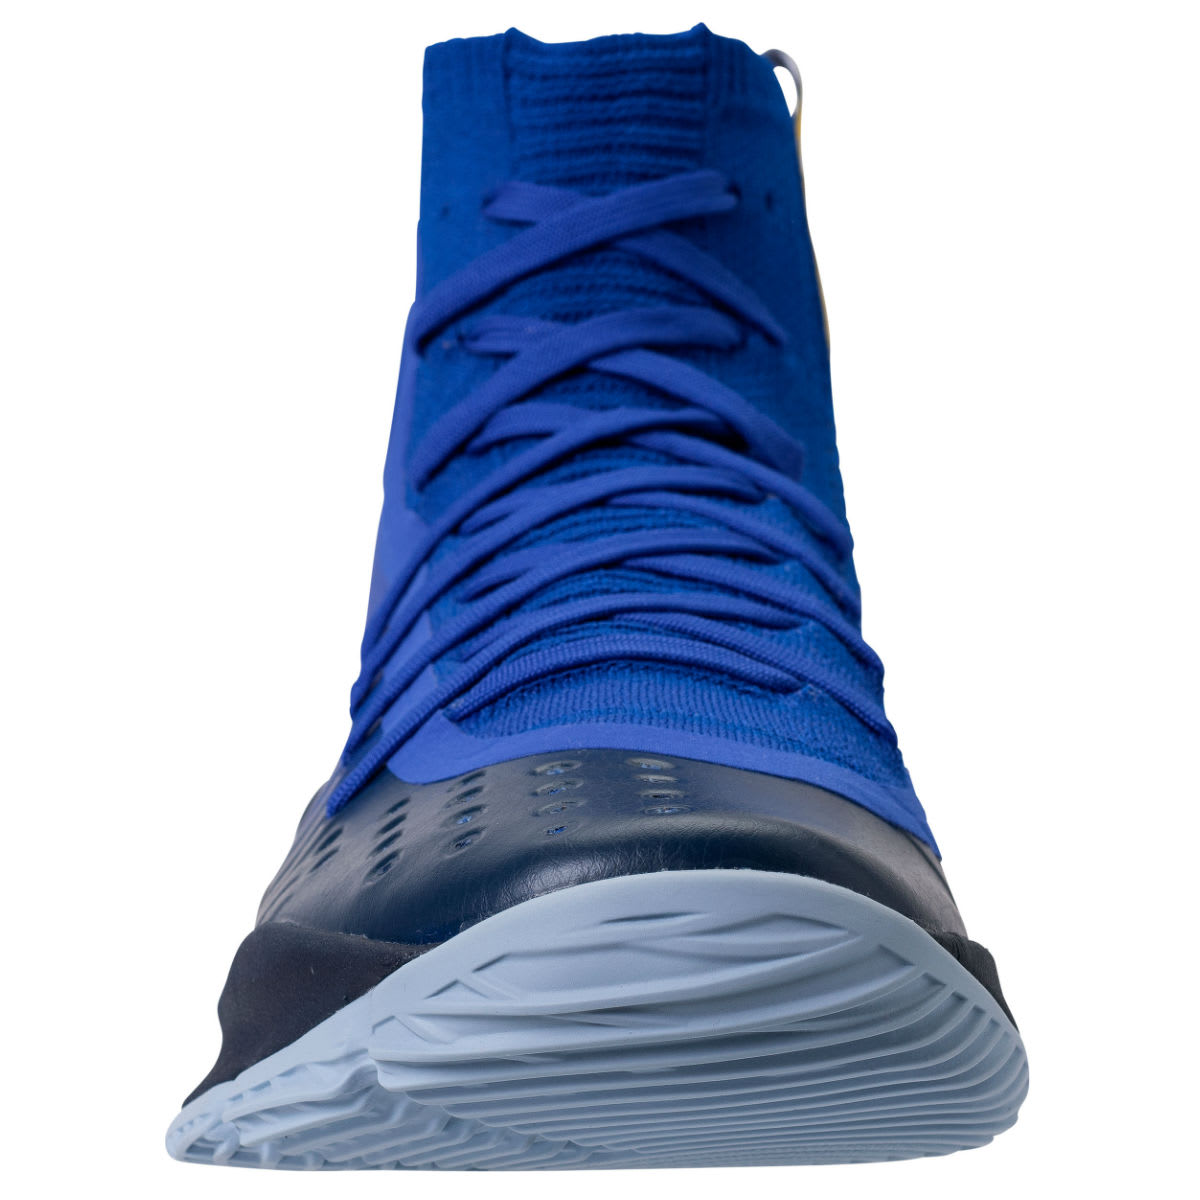 Under Armour Curry 4 Away Release Date 1298306-401 Front